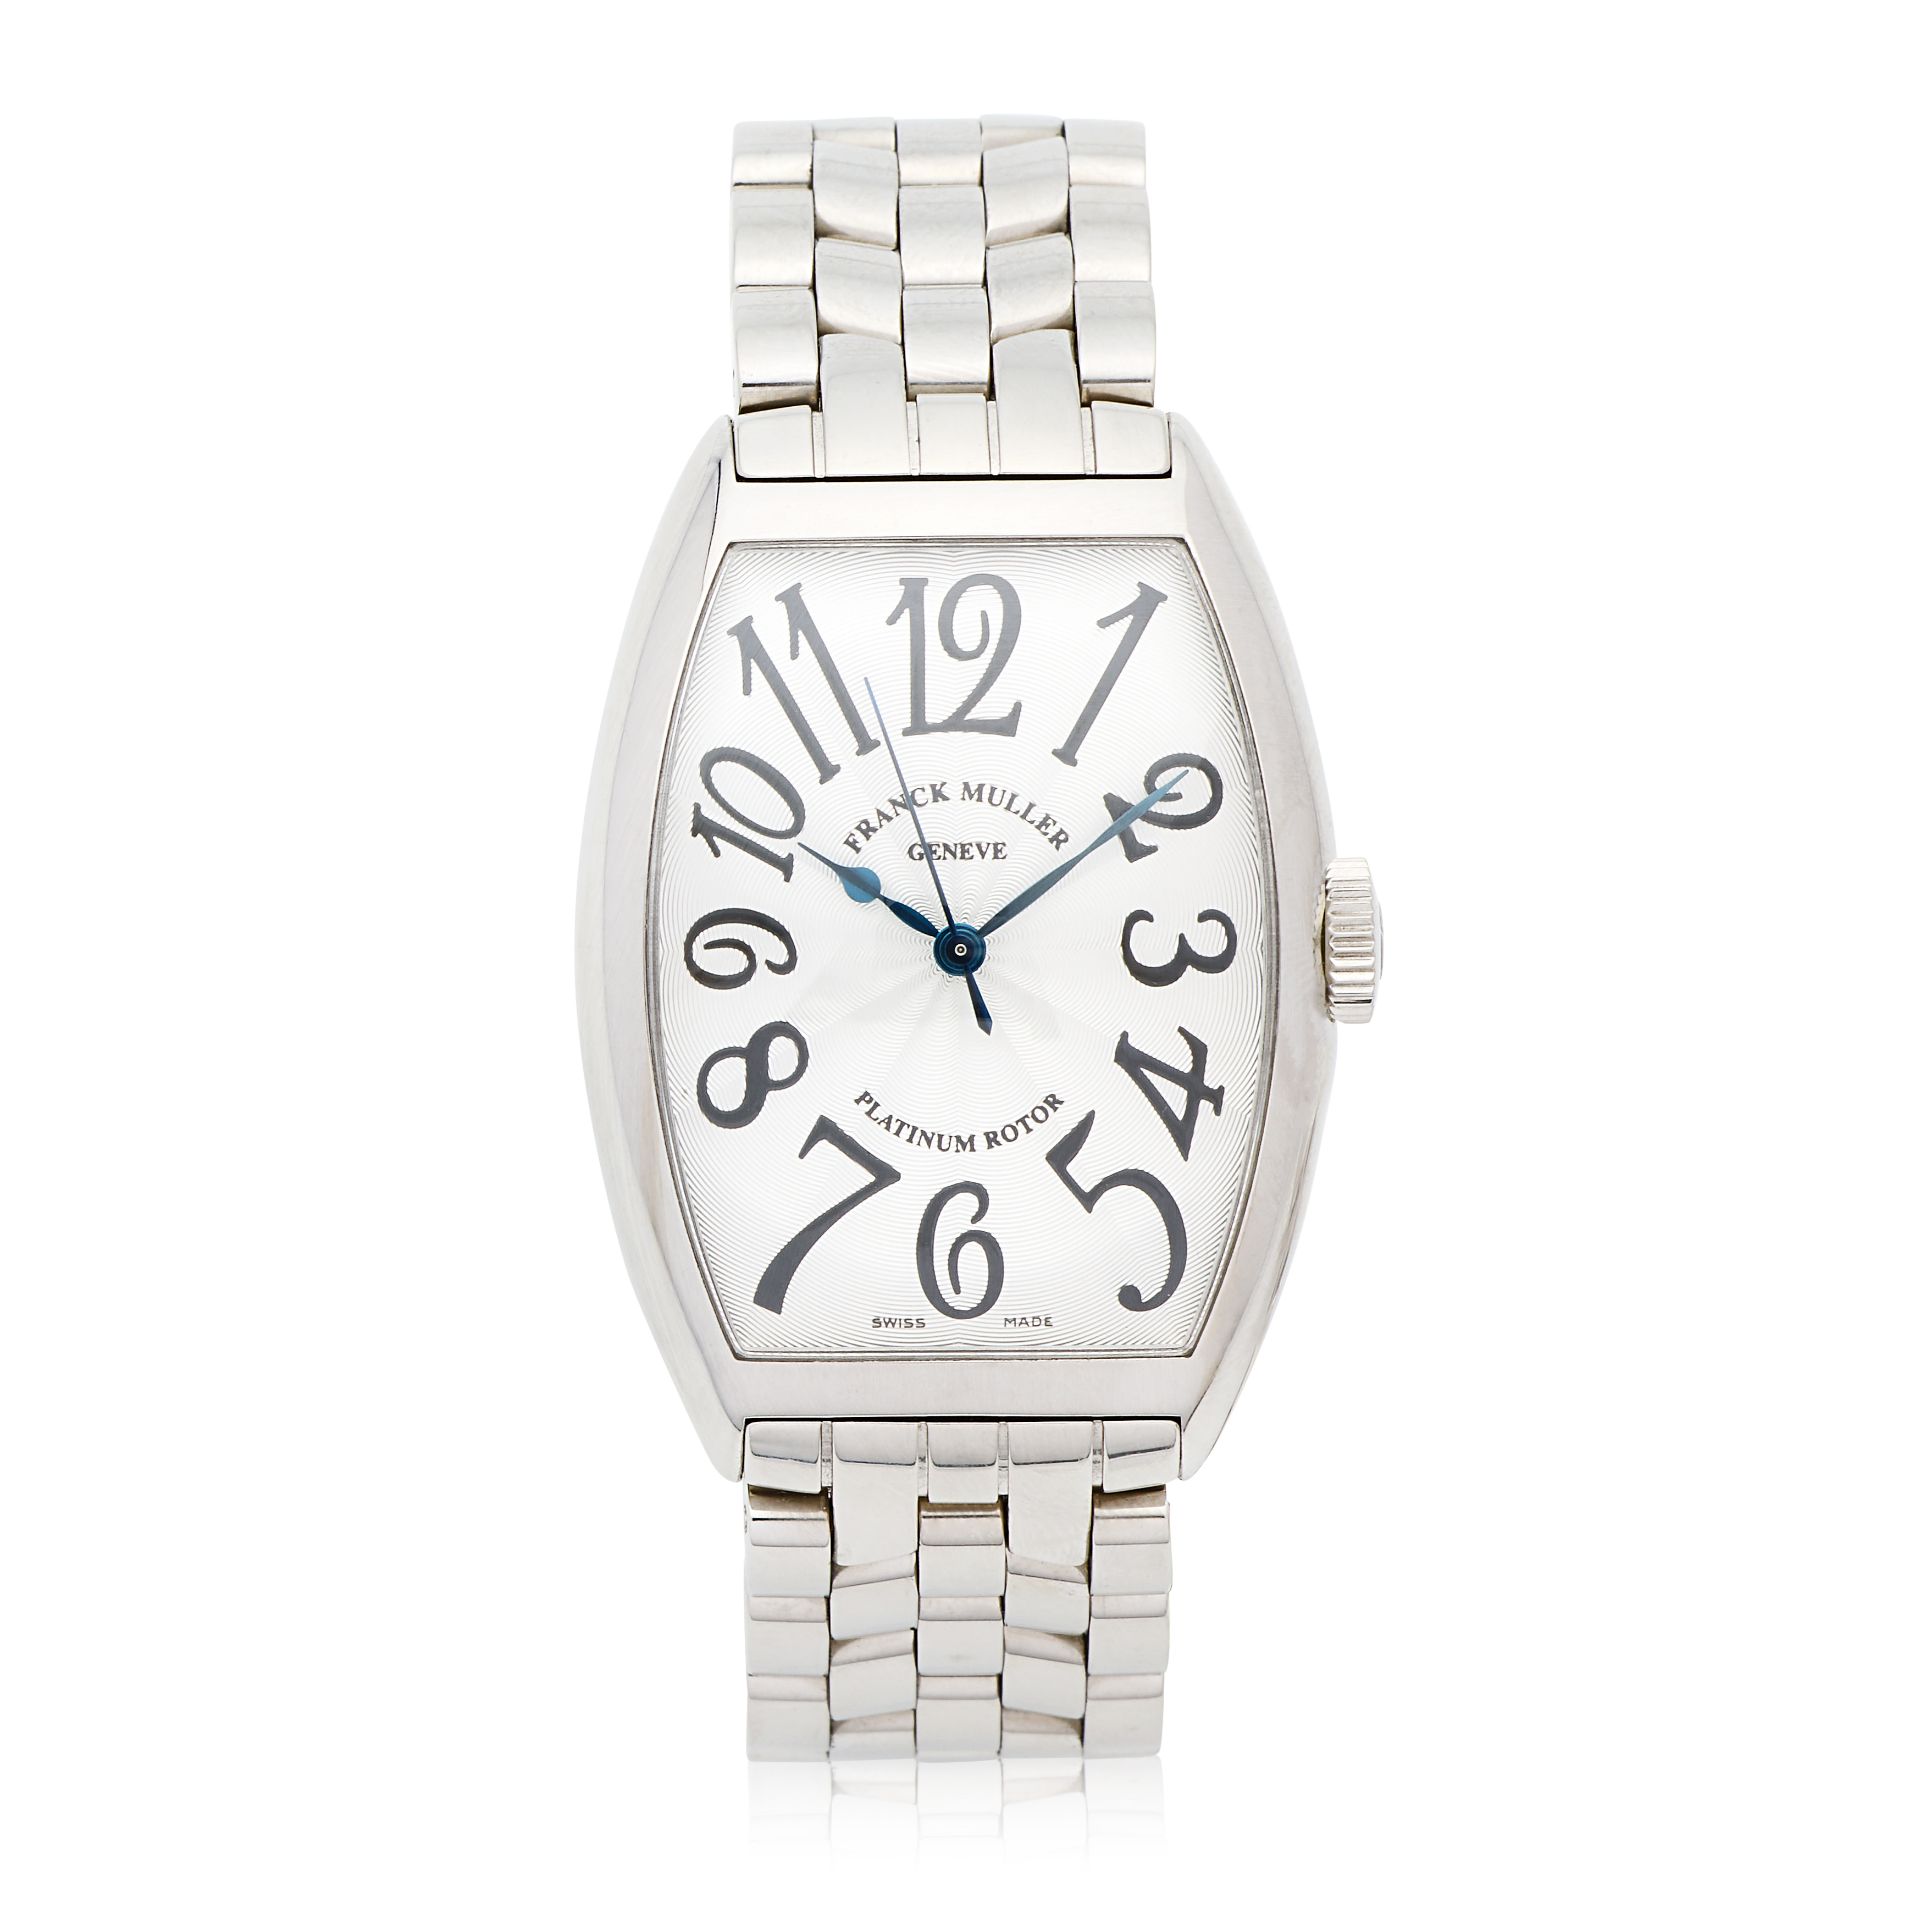 Franck Muller. A stainless steel automatic bracelet watch Ref: 5850 SC, Circa 2010